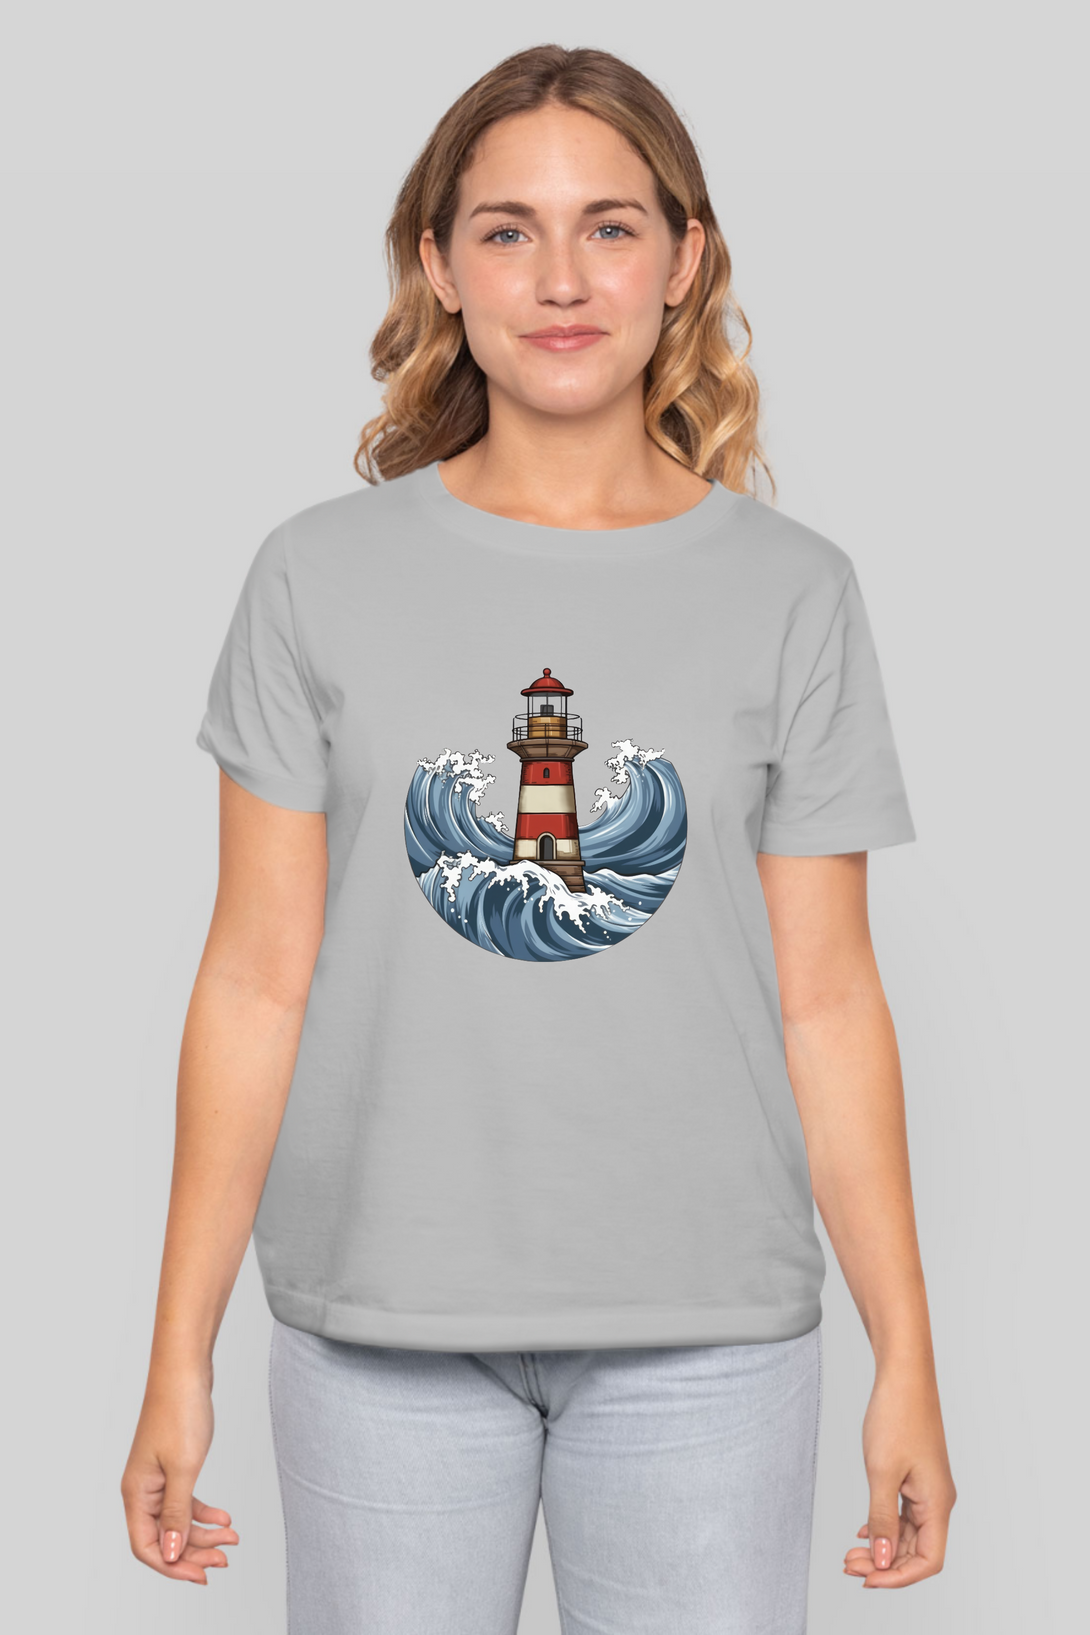 Lighthouse And Waves Printed T-Shirt For Women - WowWaves - 9